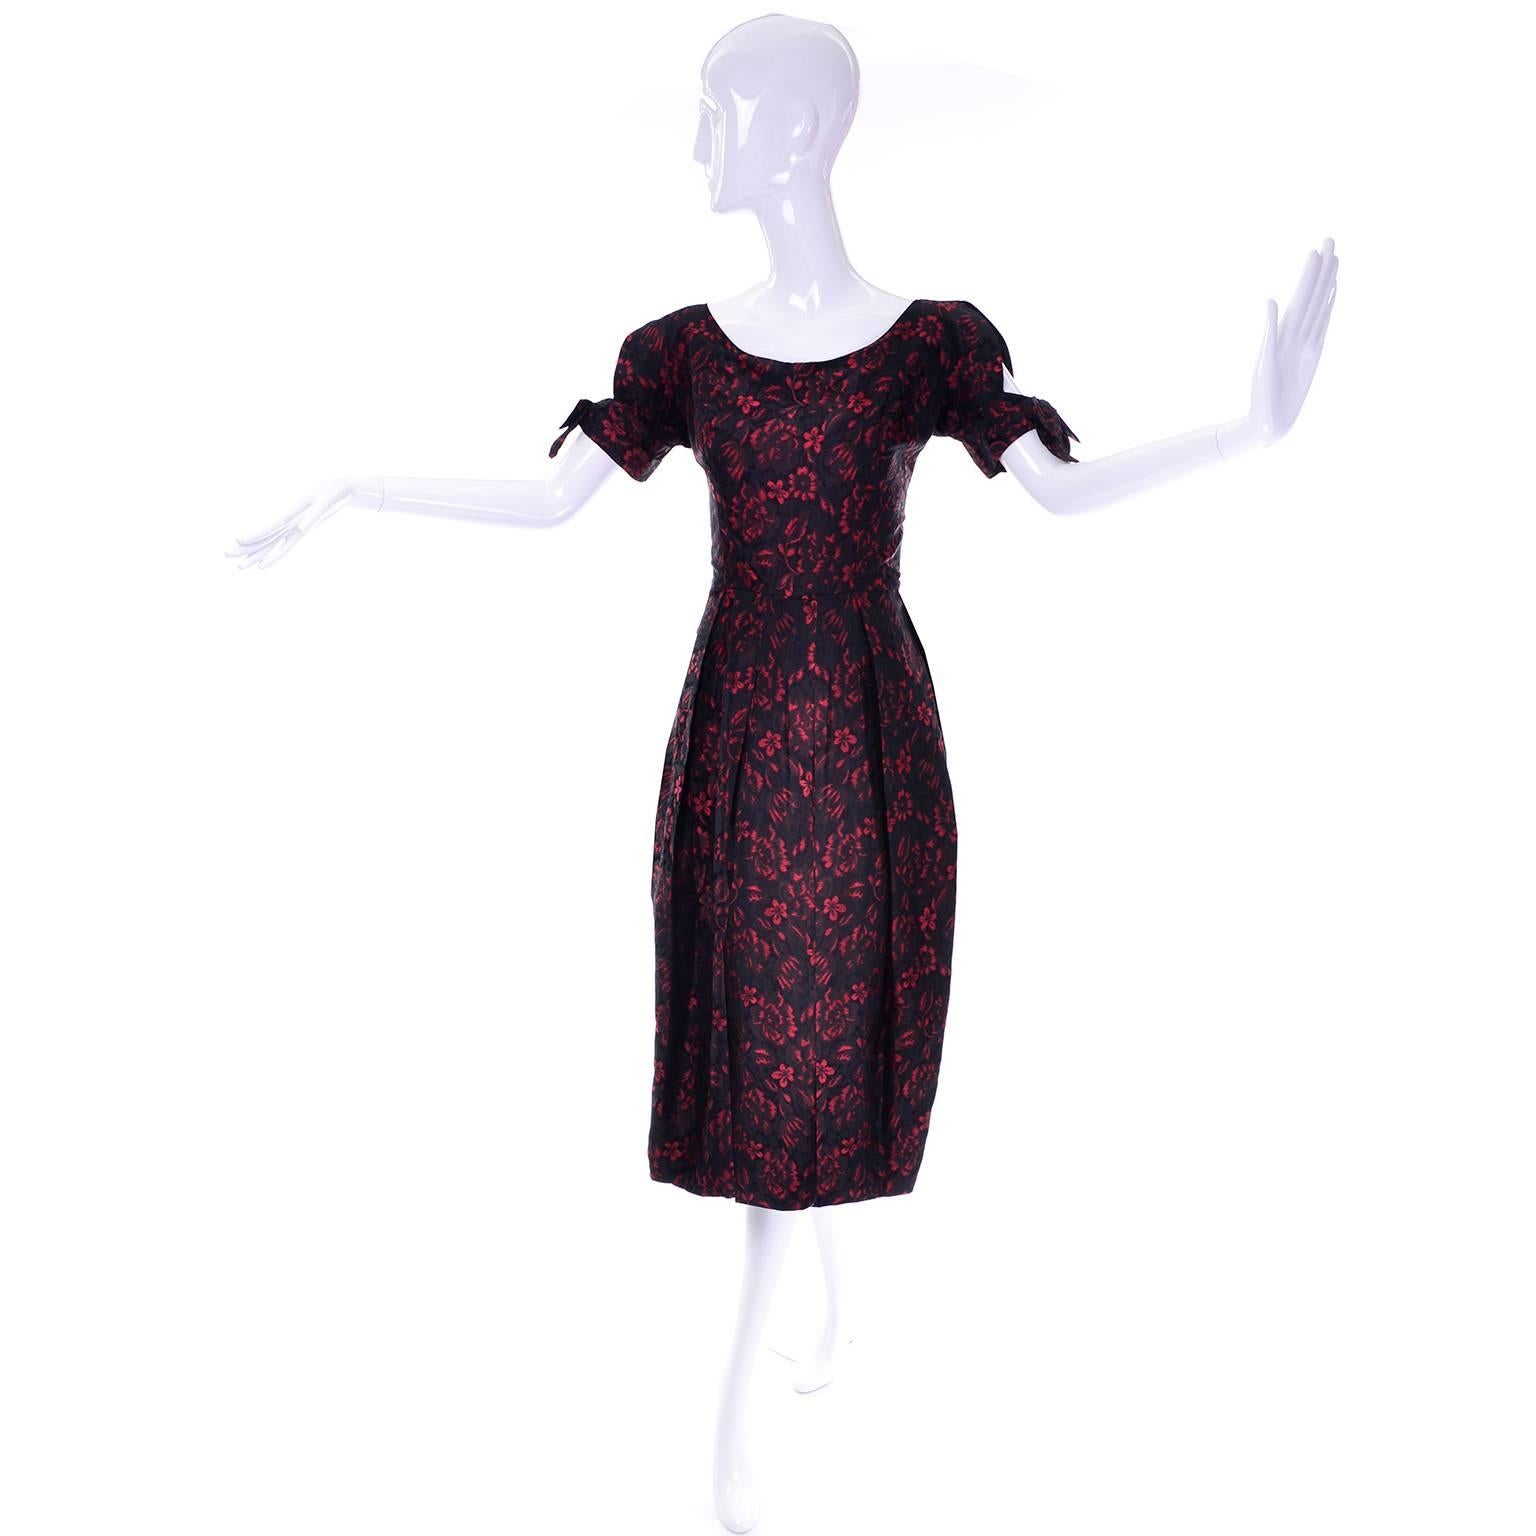 Black 1950s Suzy Perette Red Brocade Floral Vintage Cocktail Dress Dramatic Sleeves 6